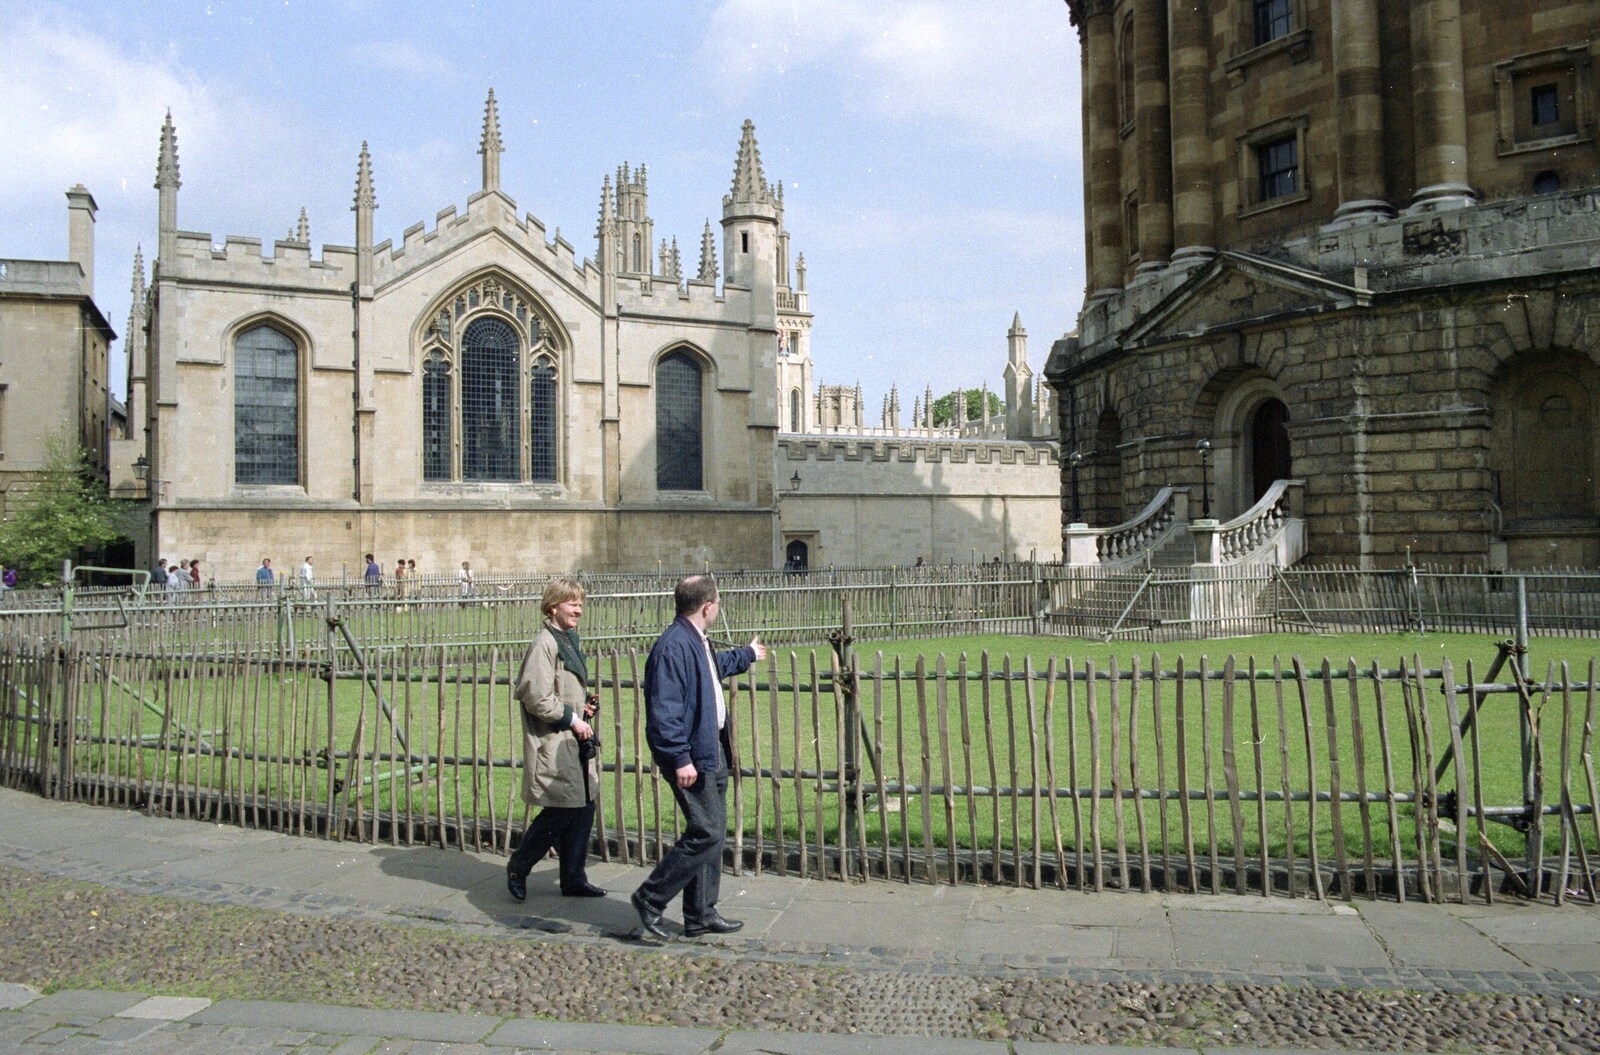 Hamish's Oxford Party, Oxfordshire - 25th April 1992: Walking around by the Radcliffe Library